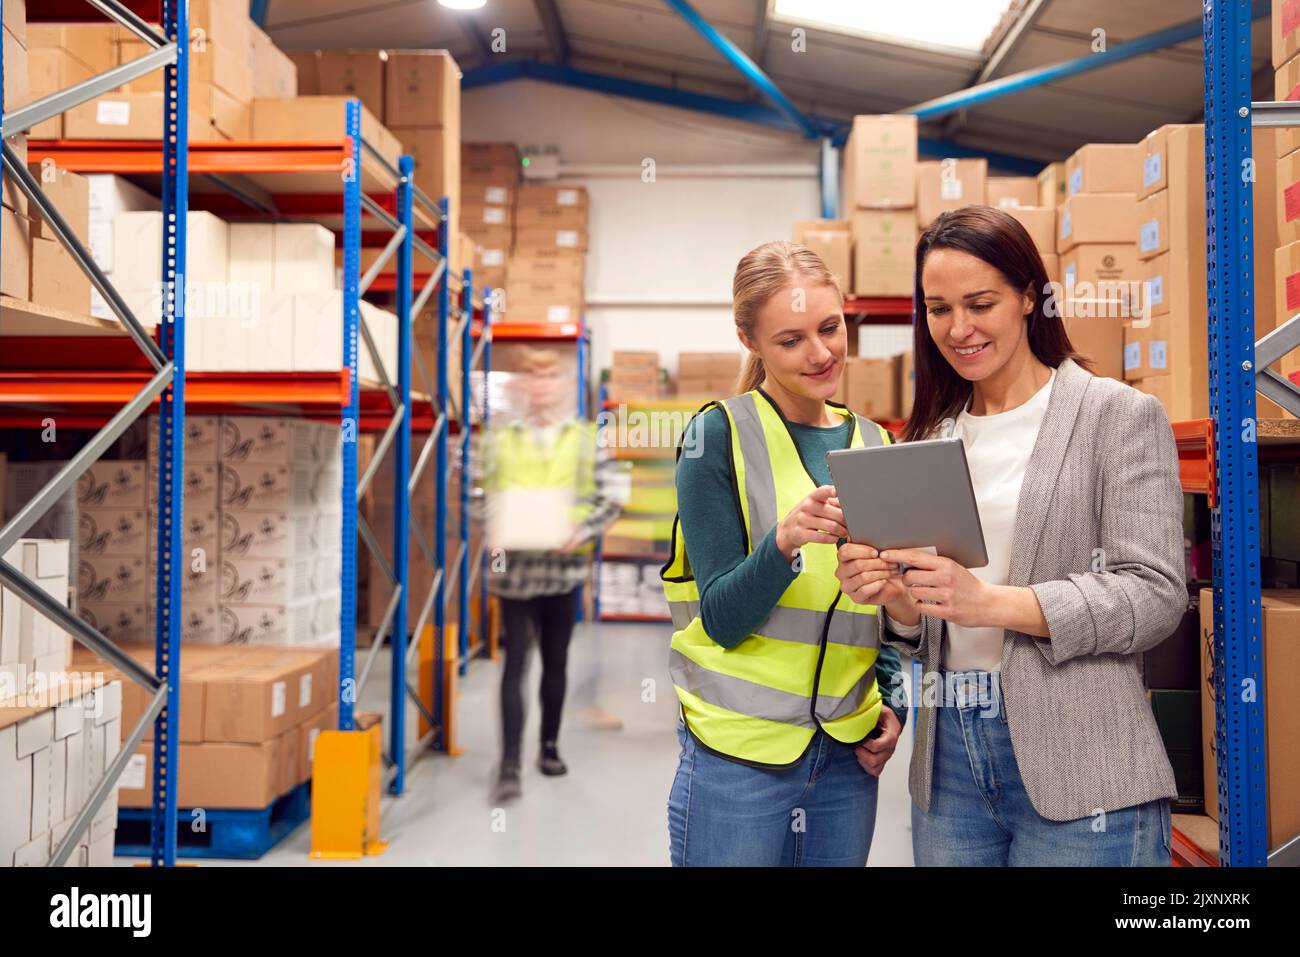 Manager Using Digital Tablet With Female Intern Inside Busy Warehouse Facility Stock Photo